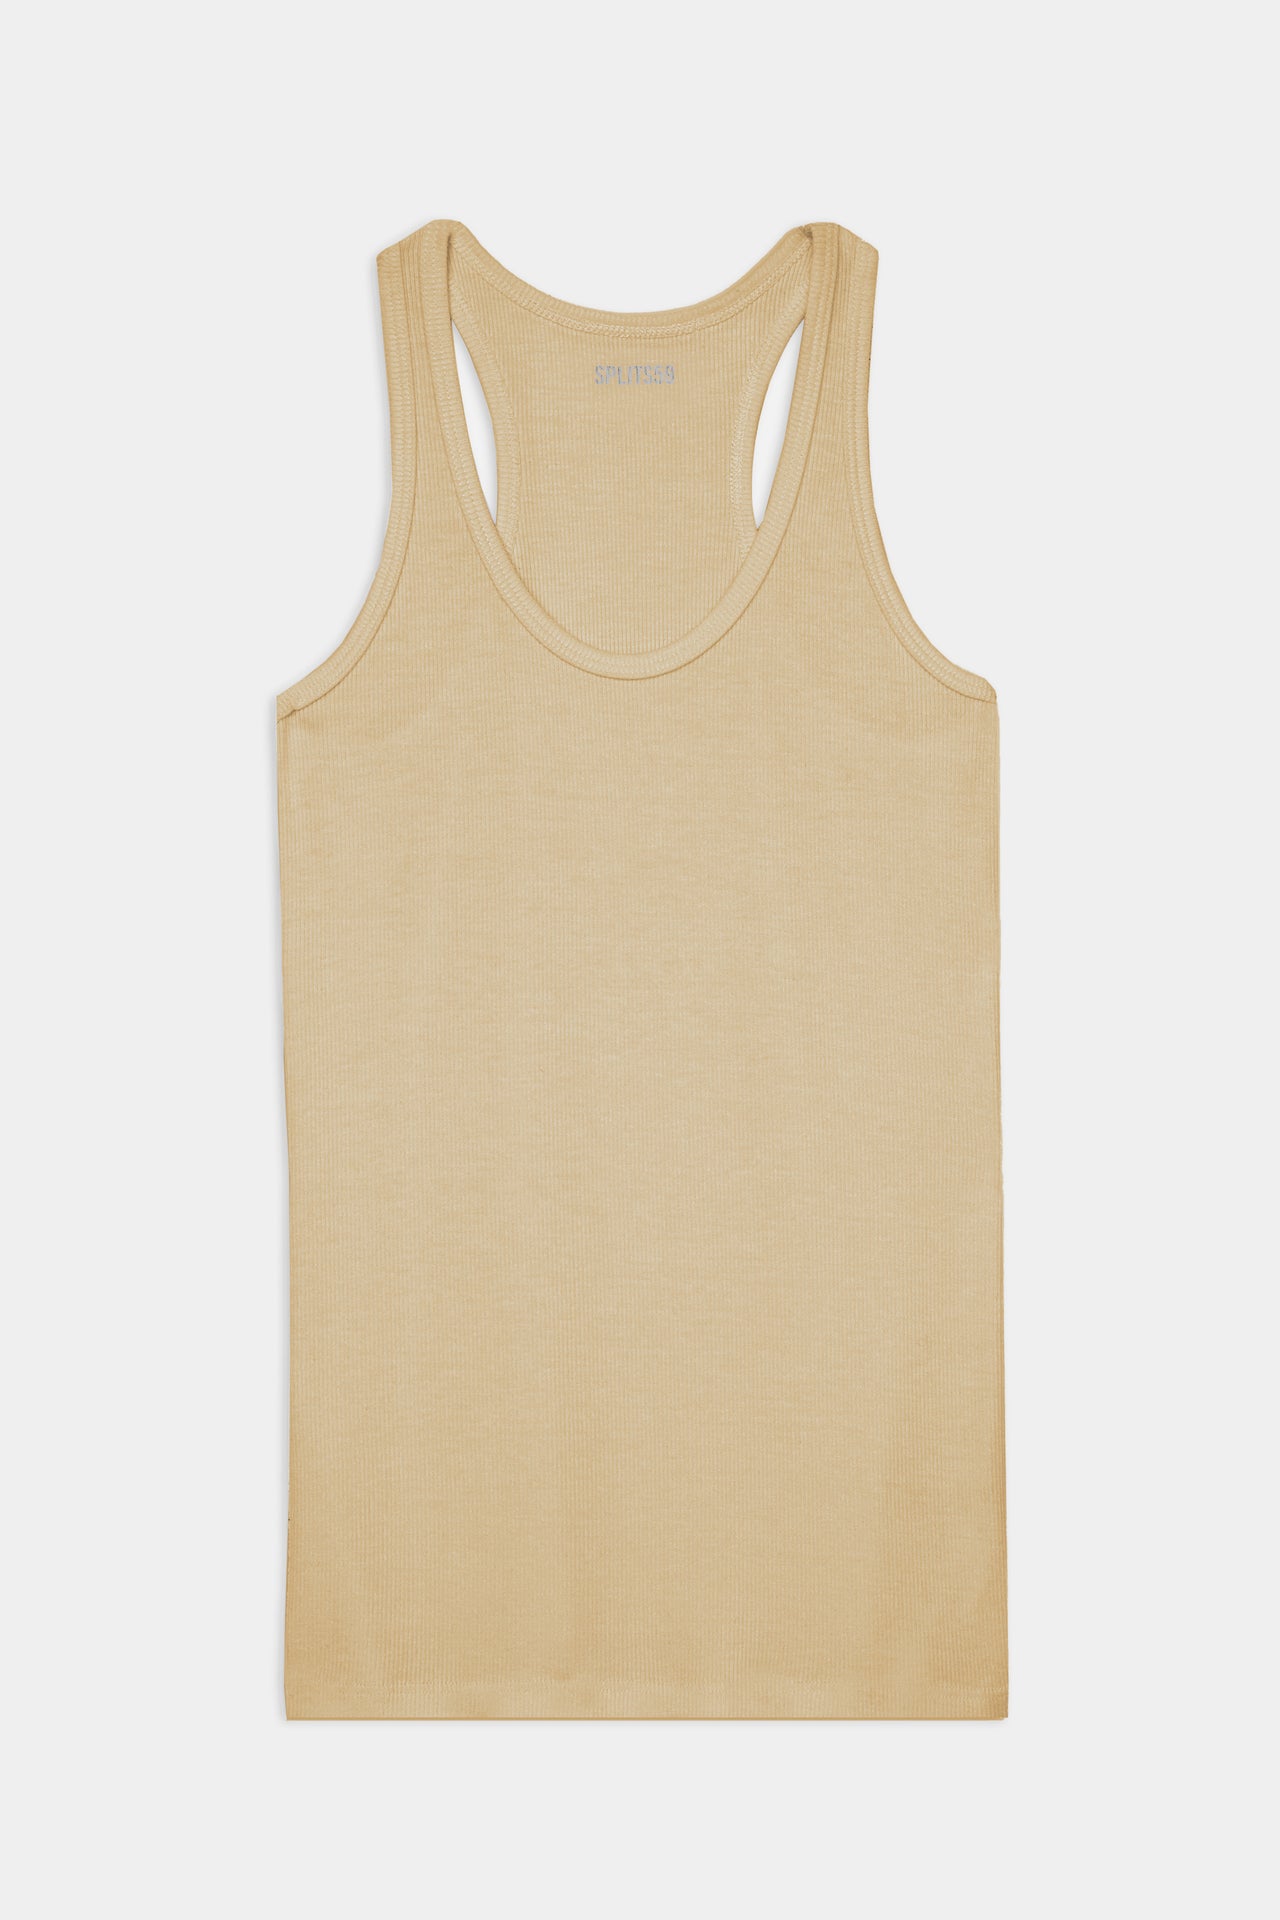 Beige tank top from the SPLITS59 Ashby Trio Bundle on a white background.